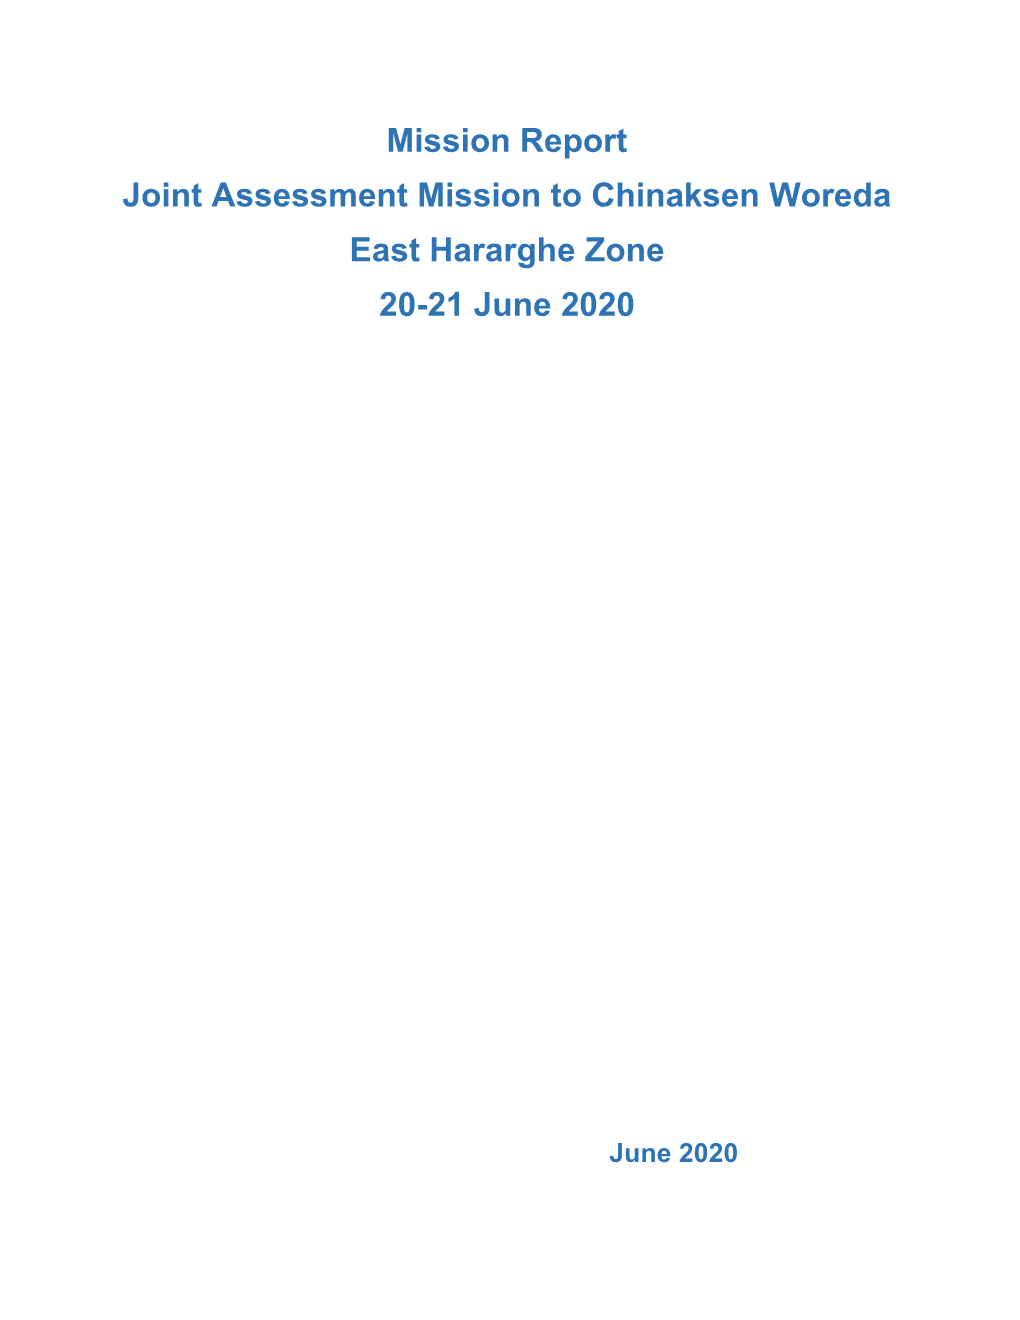 Mission Report Joint Assessment Mission to Chinaksen Woreda East Hararghe Zone 20-21 June 2020